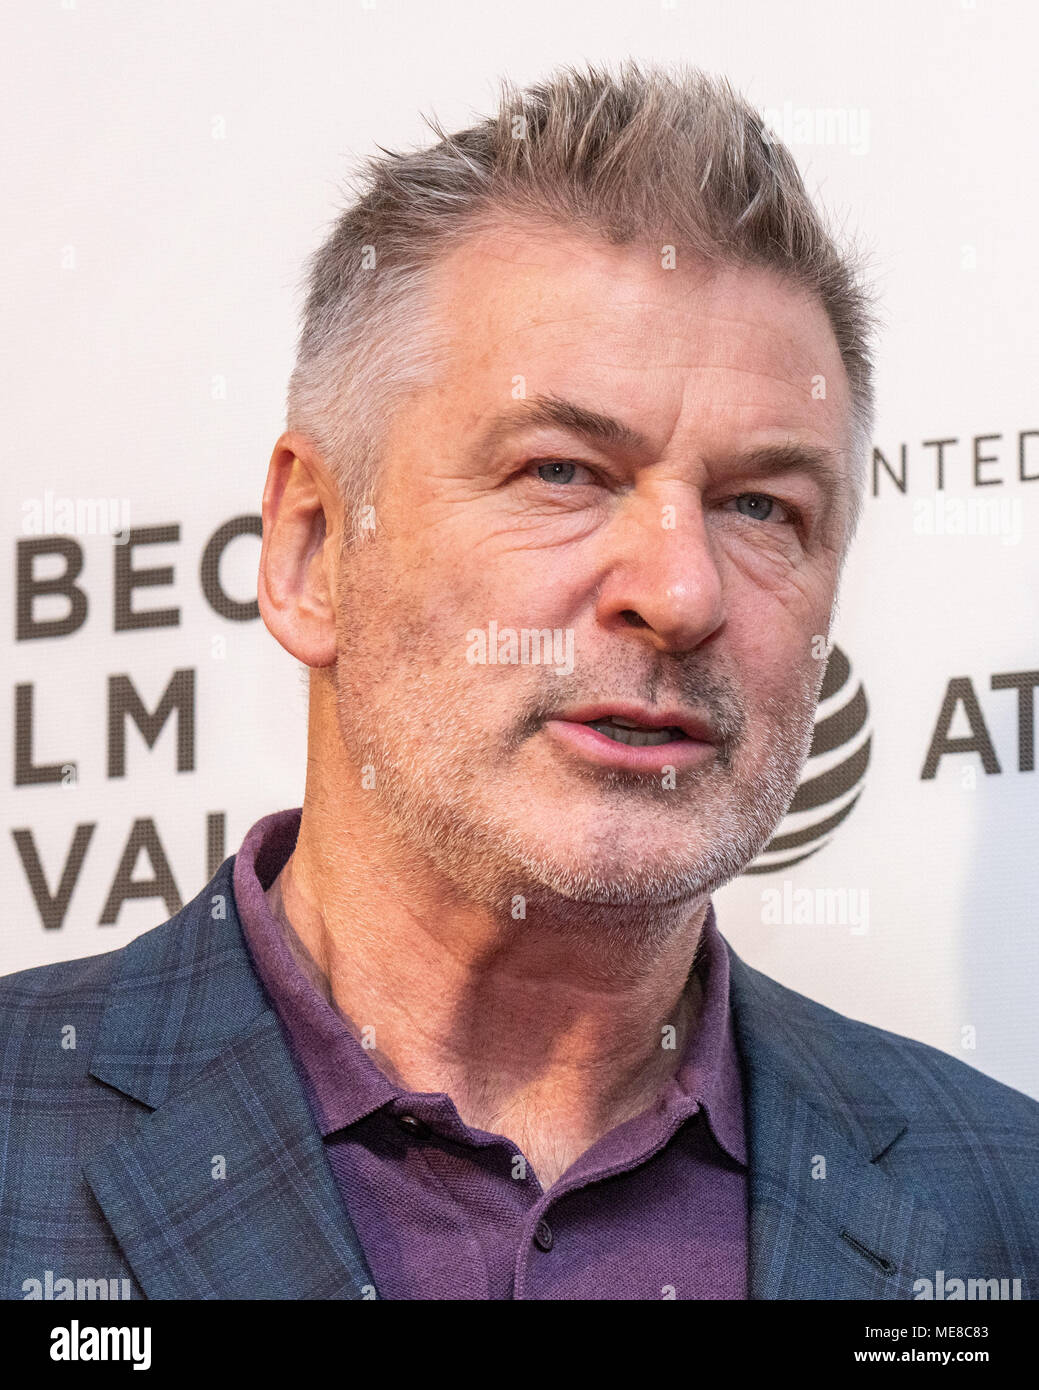 New York, USA, 21 April 2018. Actor Alec Baldwin attends the premiere of 'The Seagull' at the 2018 Tribeca Film Festival in New York city.  Photo by Enrique Shore /Alamy Live News Stock Photo